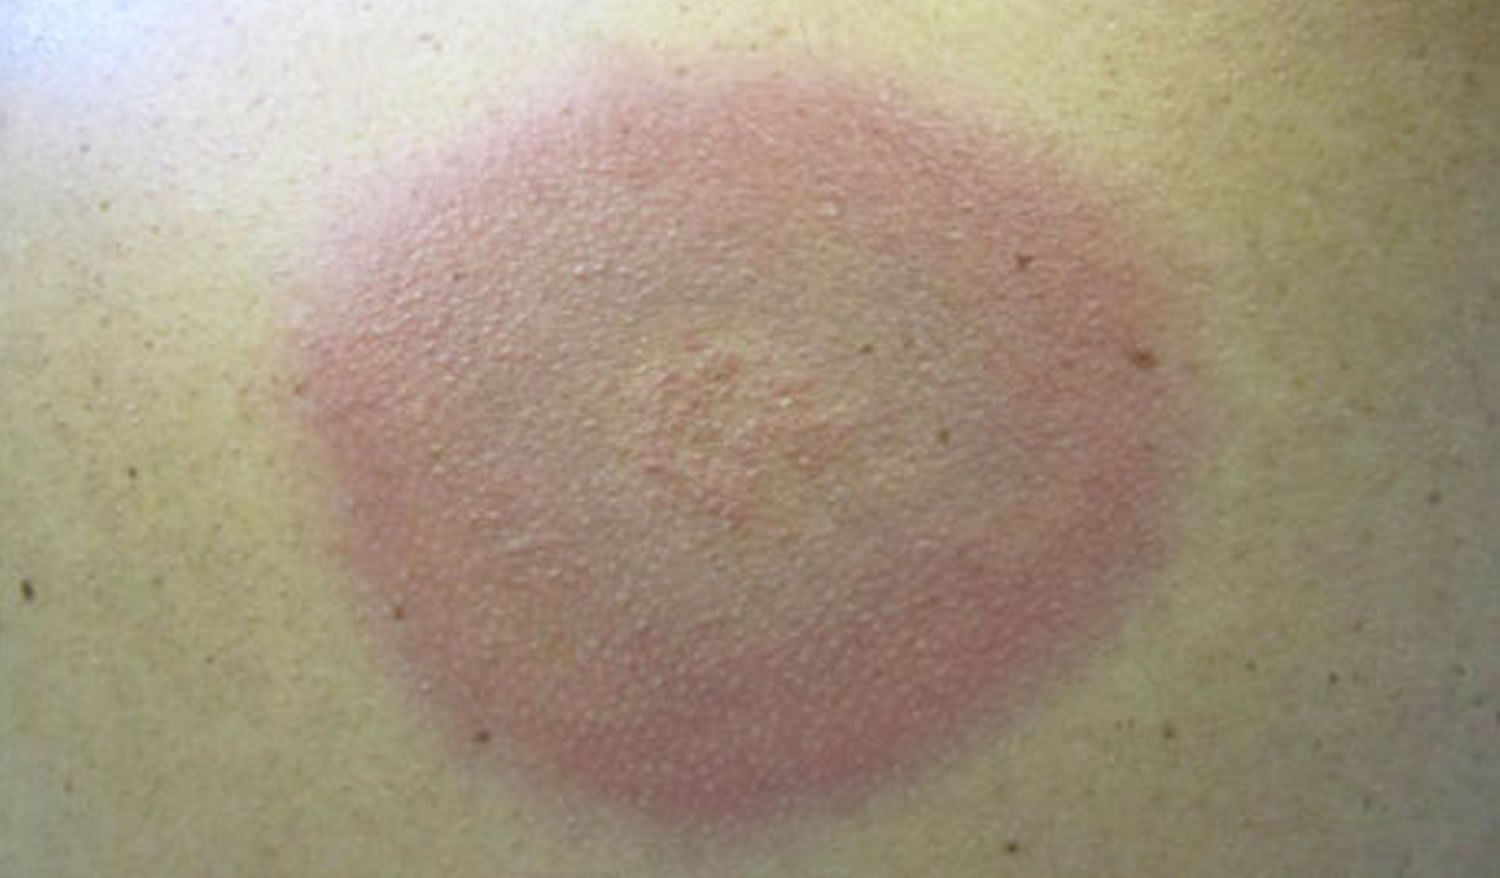 lyme disease rash - bluish rash with no central clearing